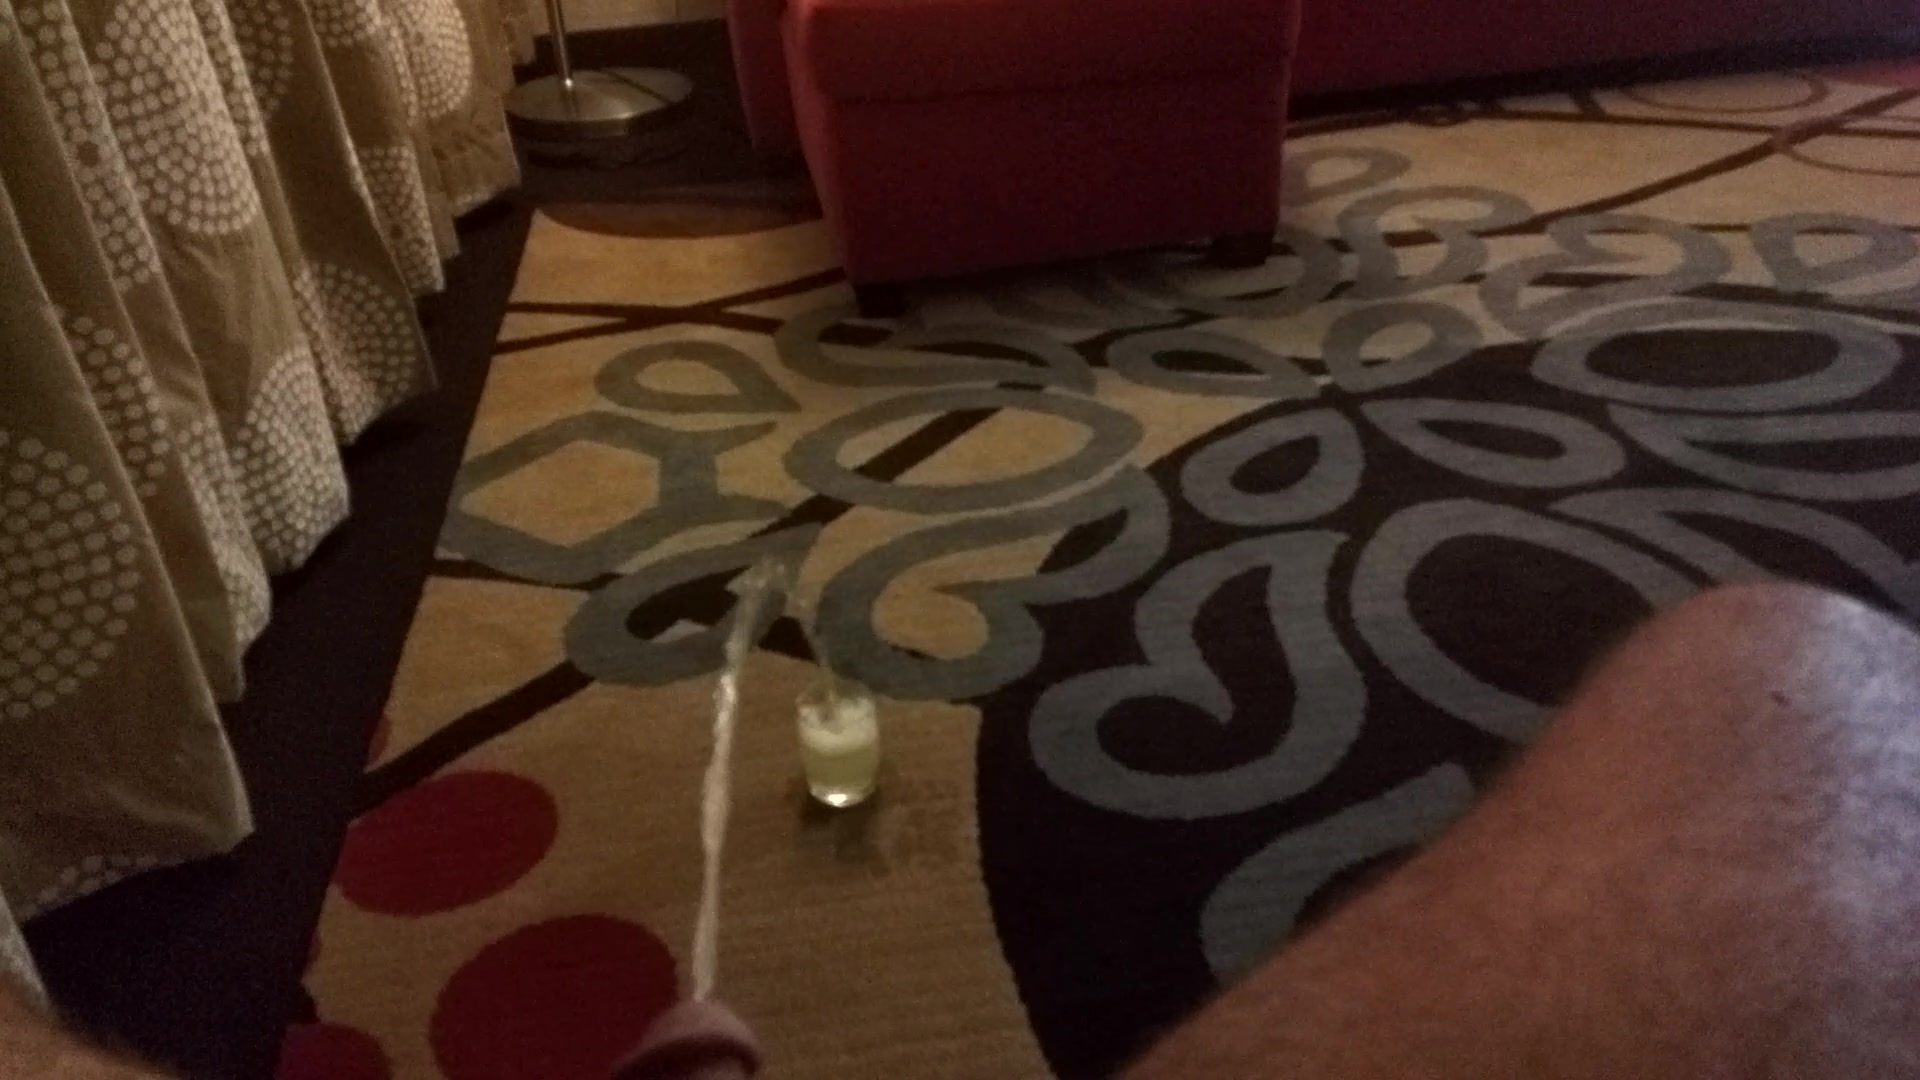 Piss on carpet into glass